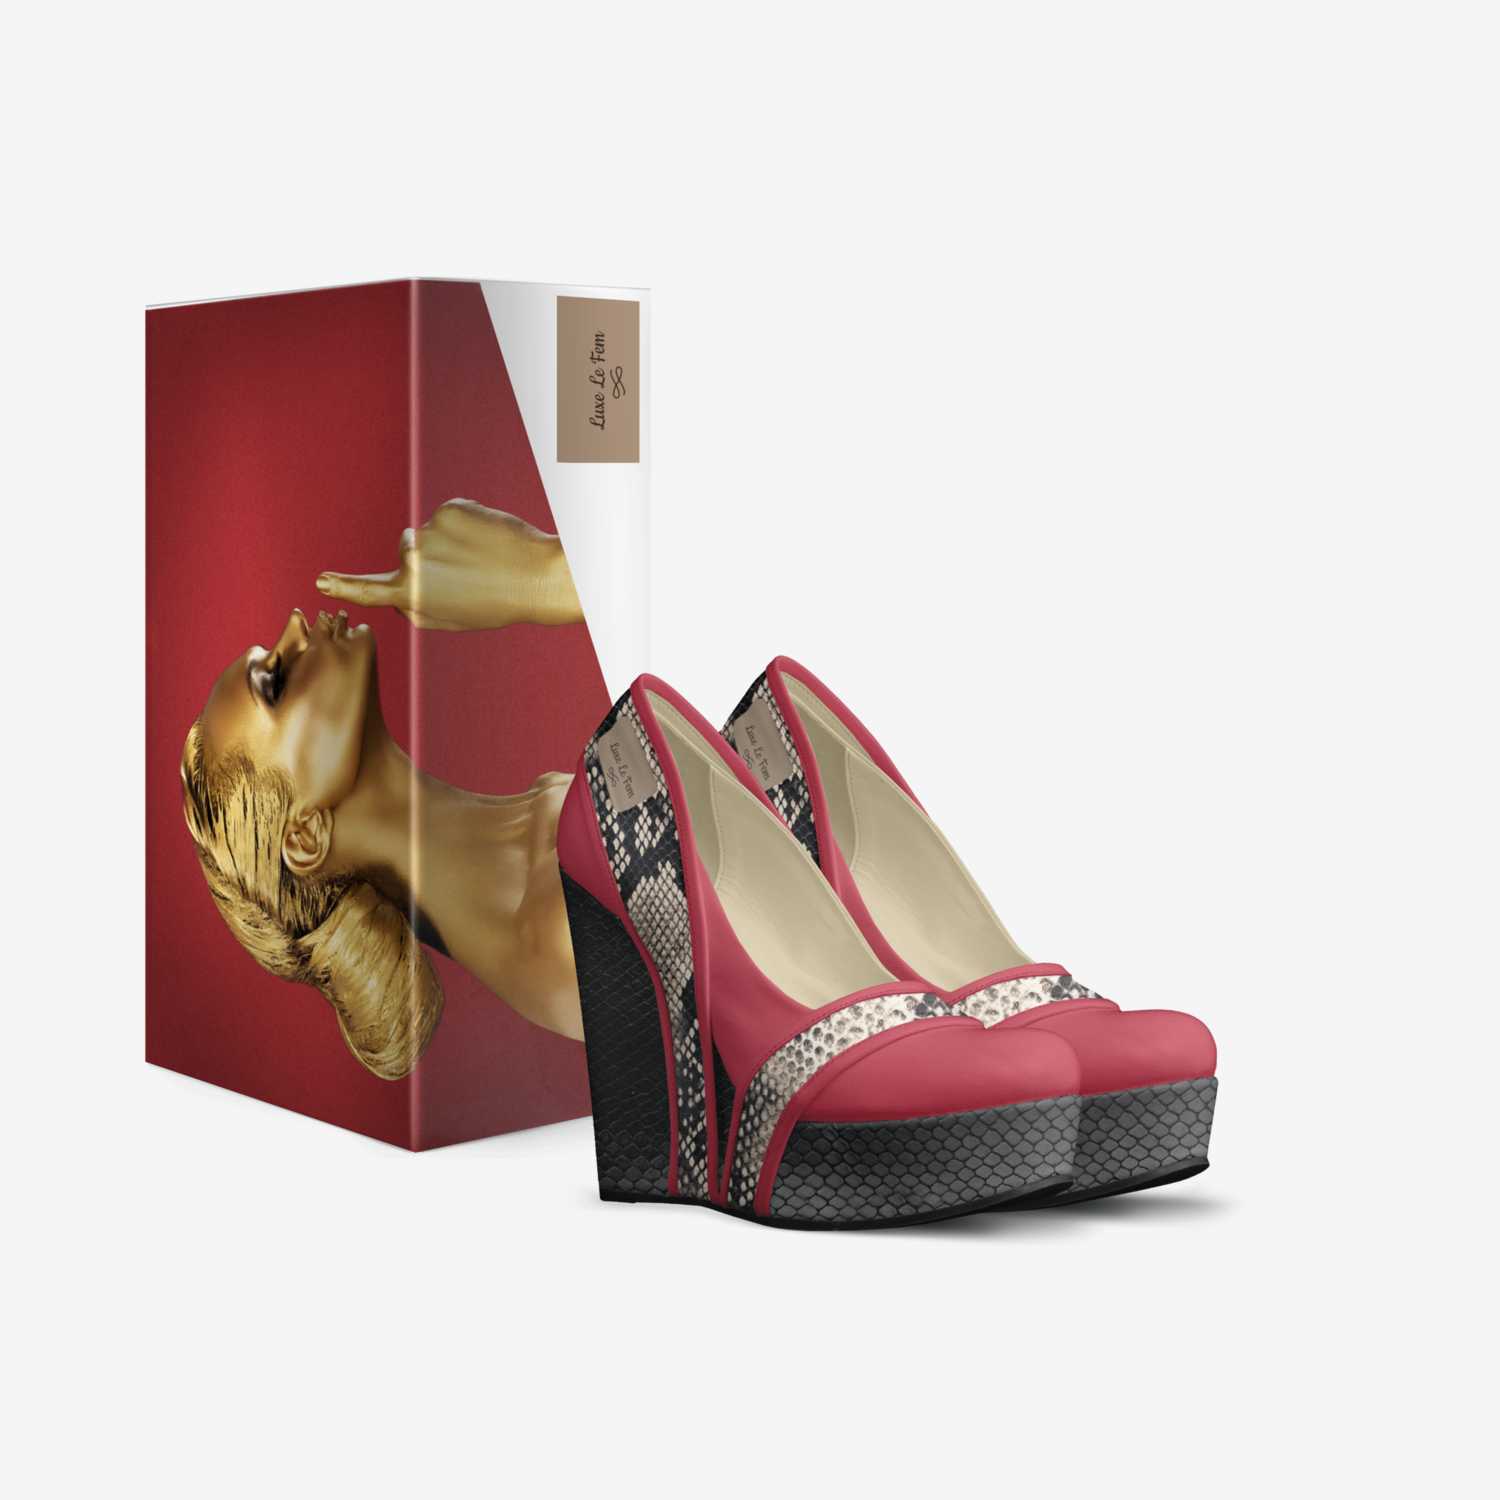 Luxe Le Fem custom made in Italy shoes by Tawana Davidson | Box view